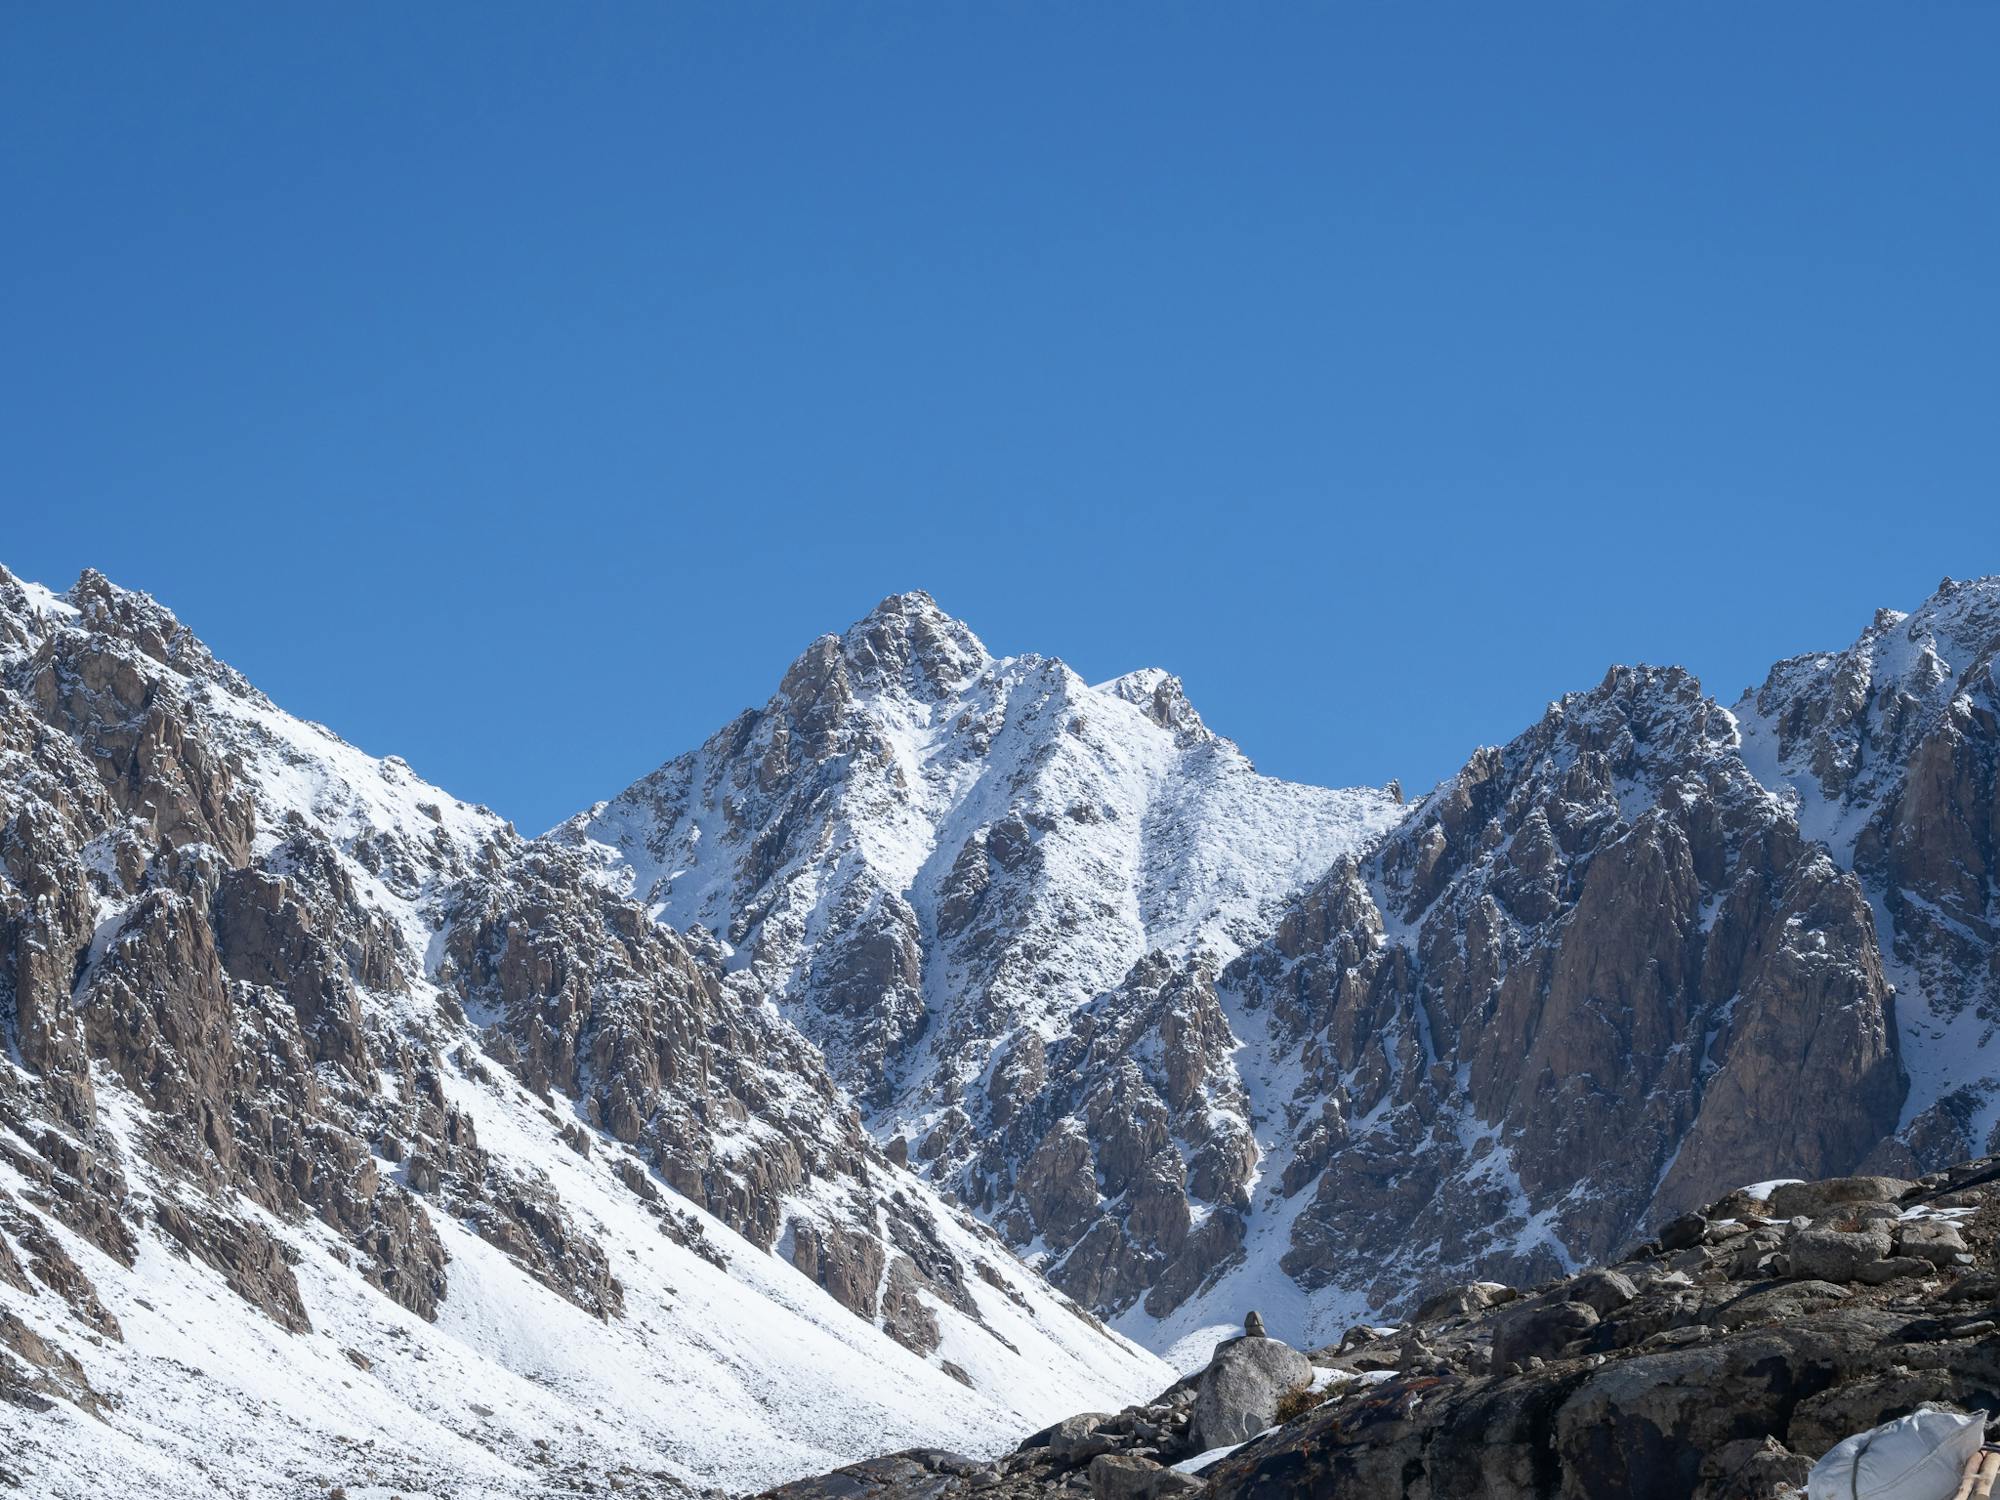 Snow Capped Mountains in the Pamirs